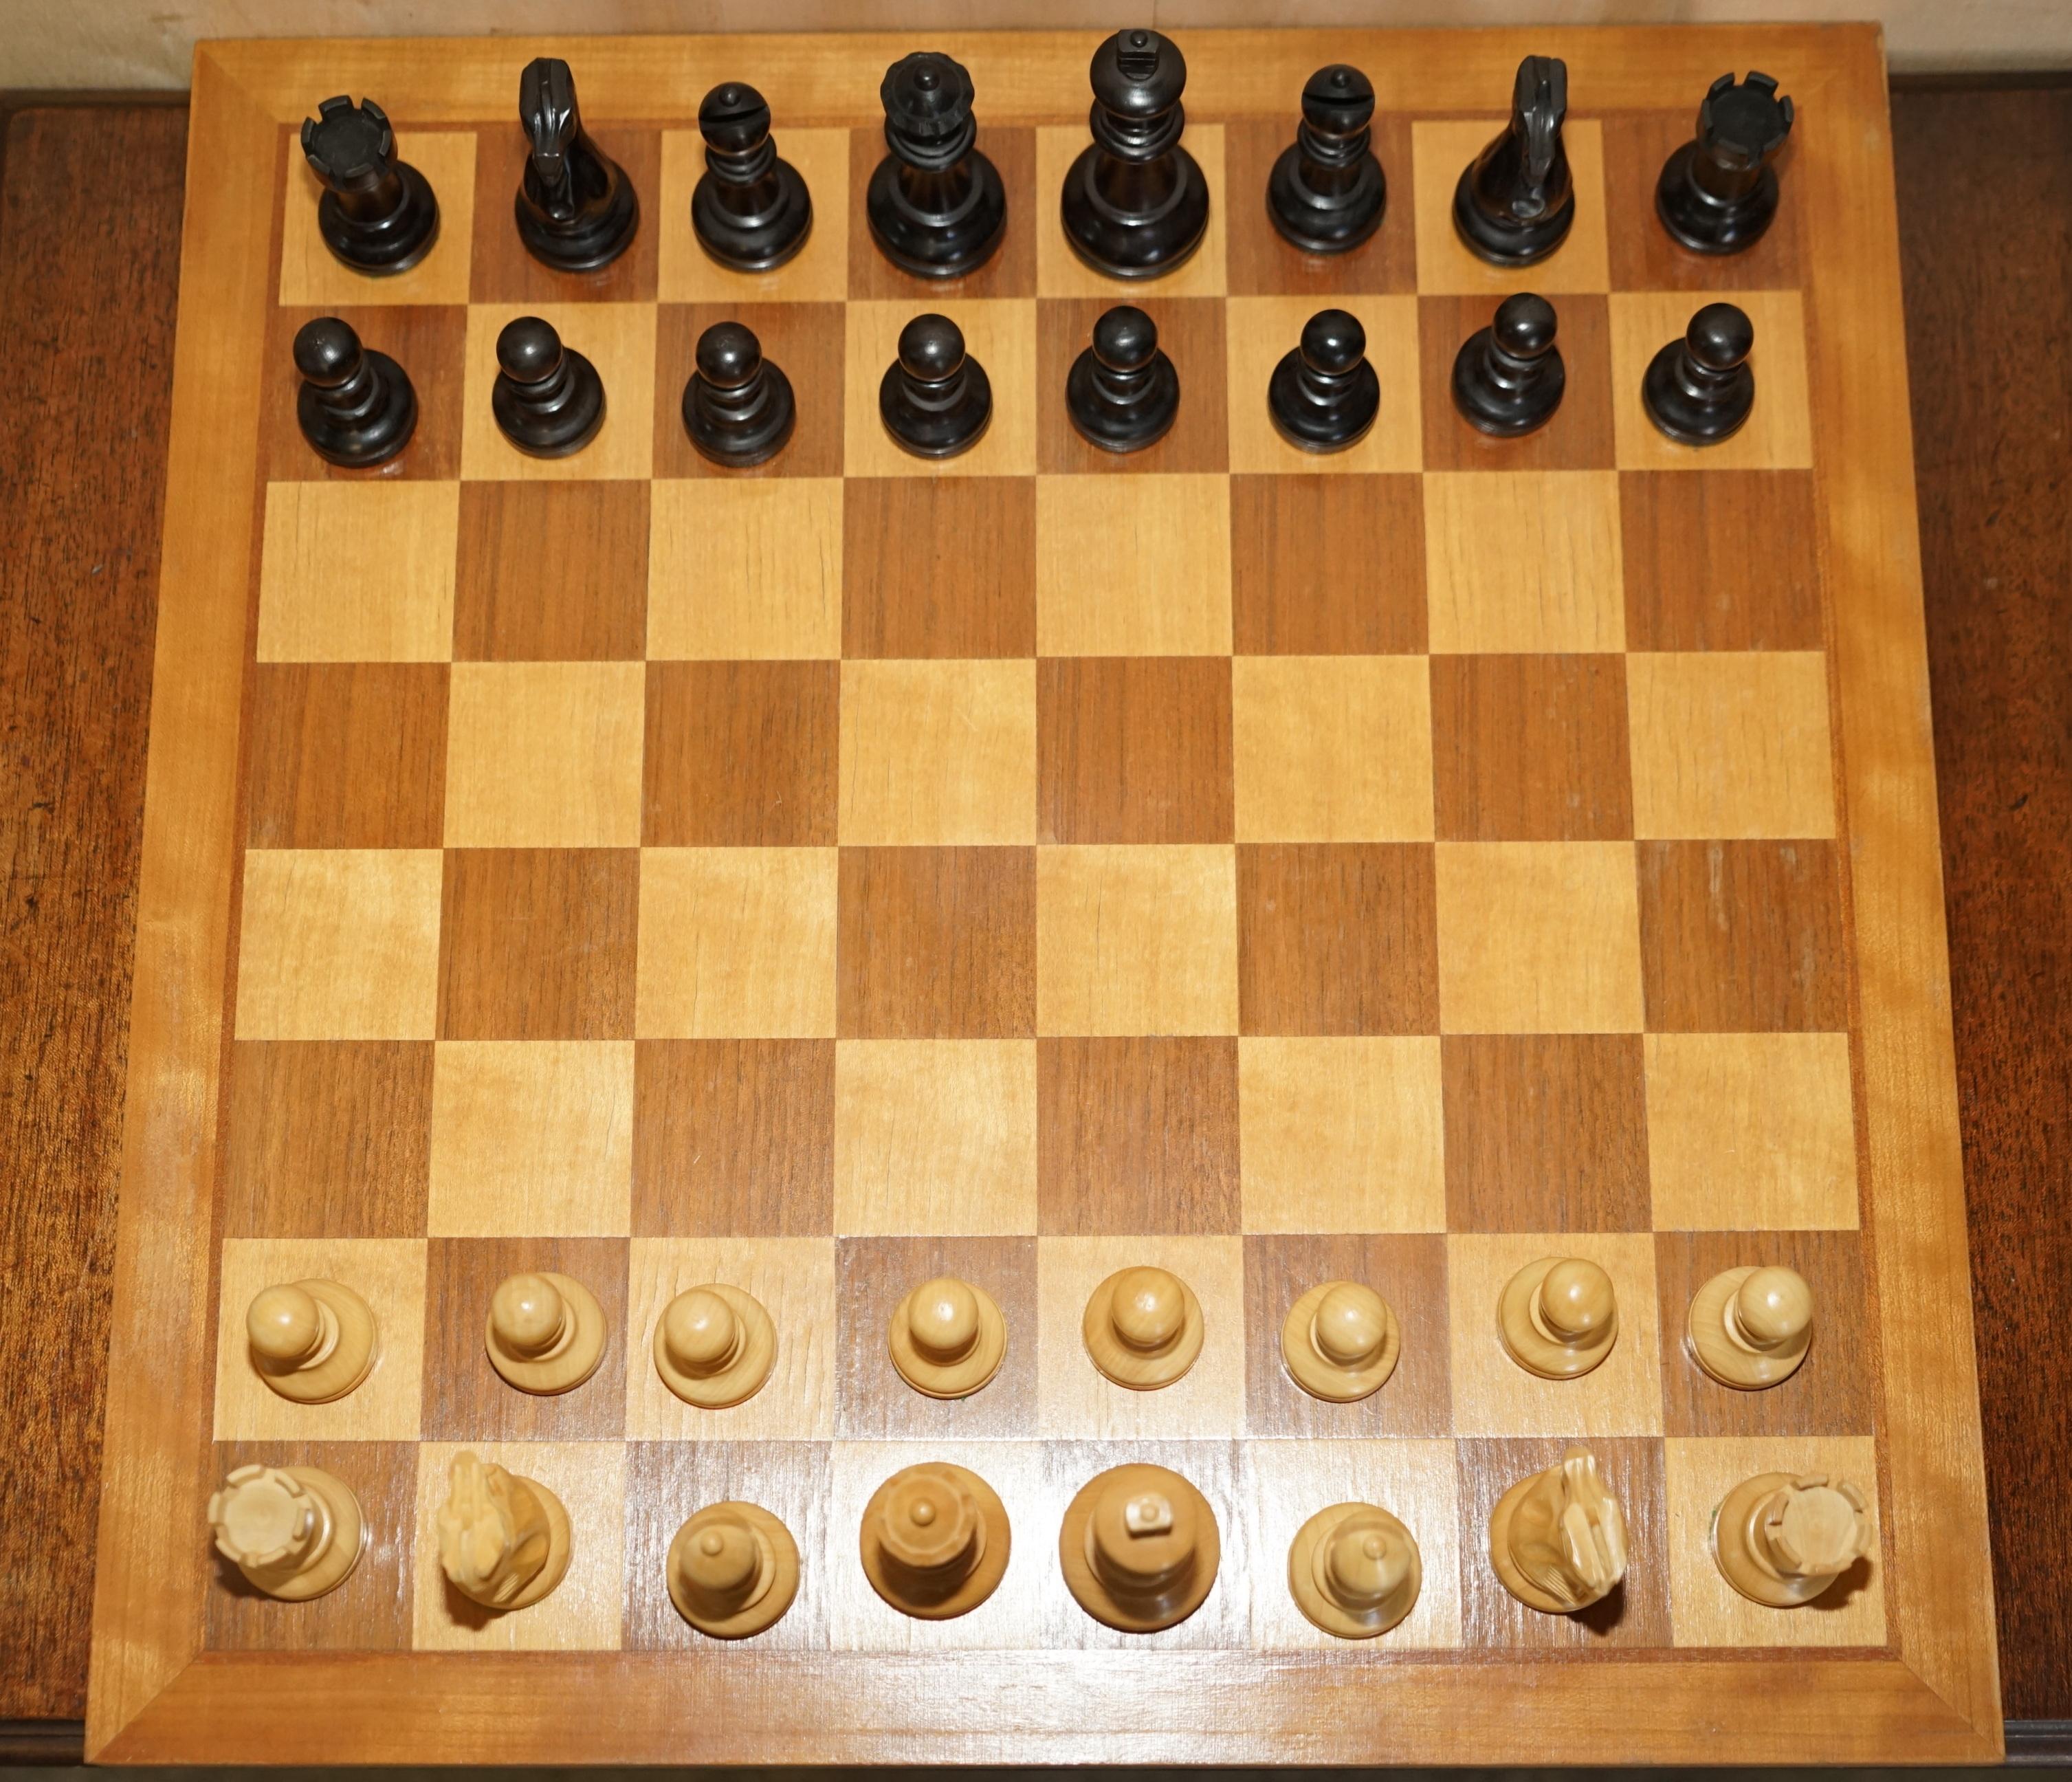 Jaques of London Staunton Chessmen Set with Board Chess Board and Pieces 5